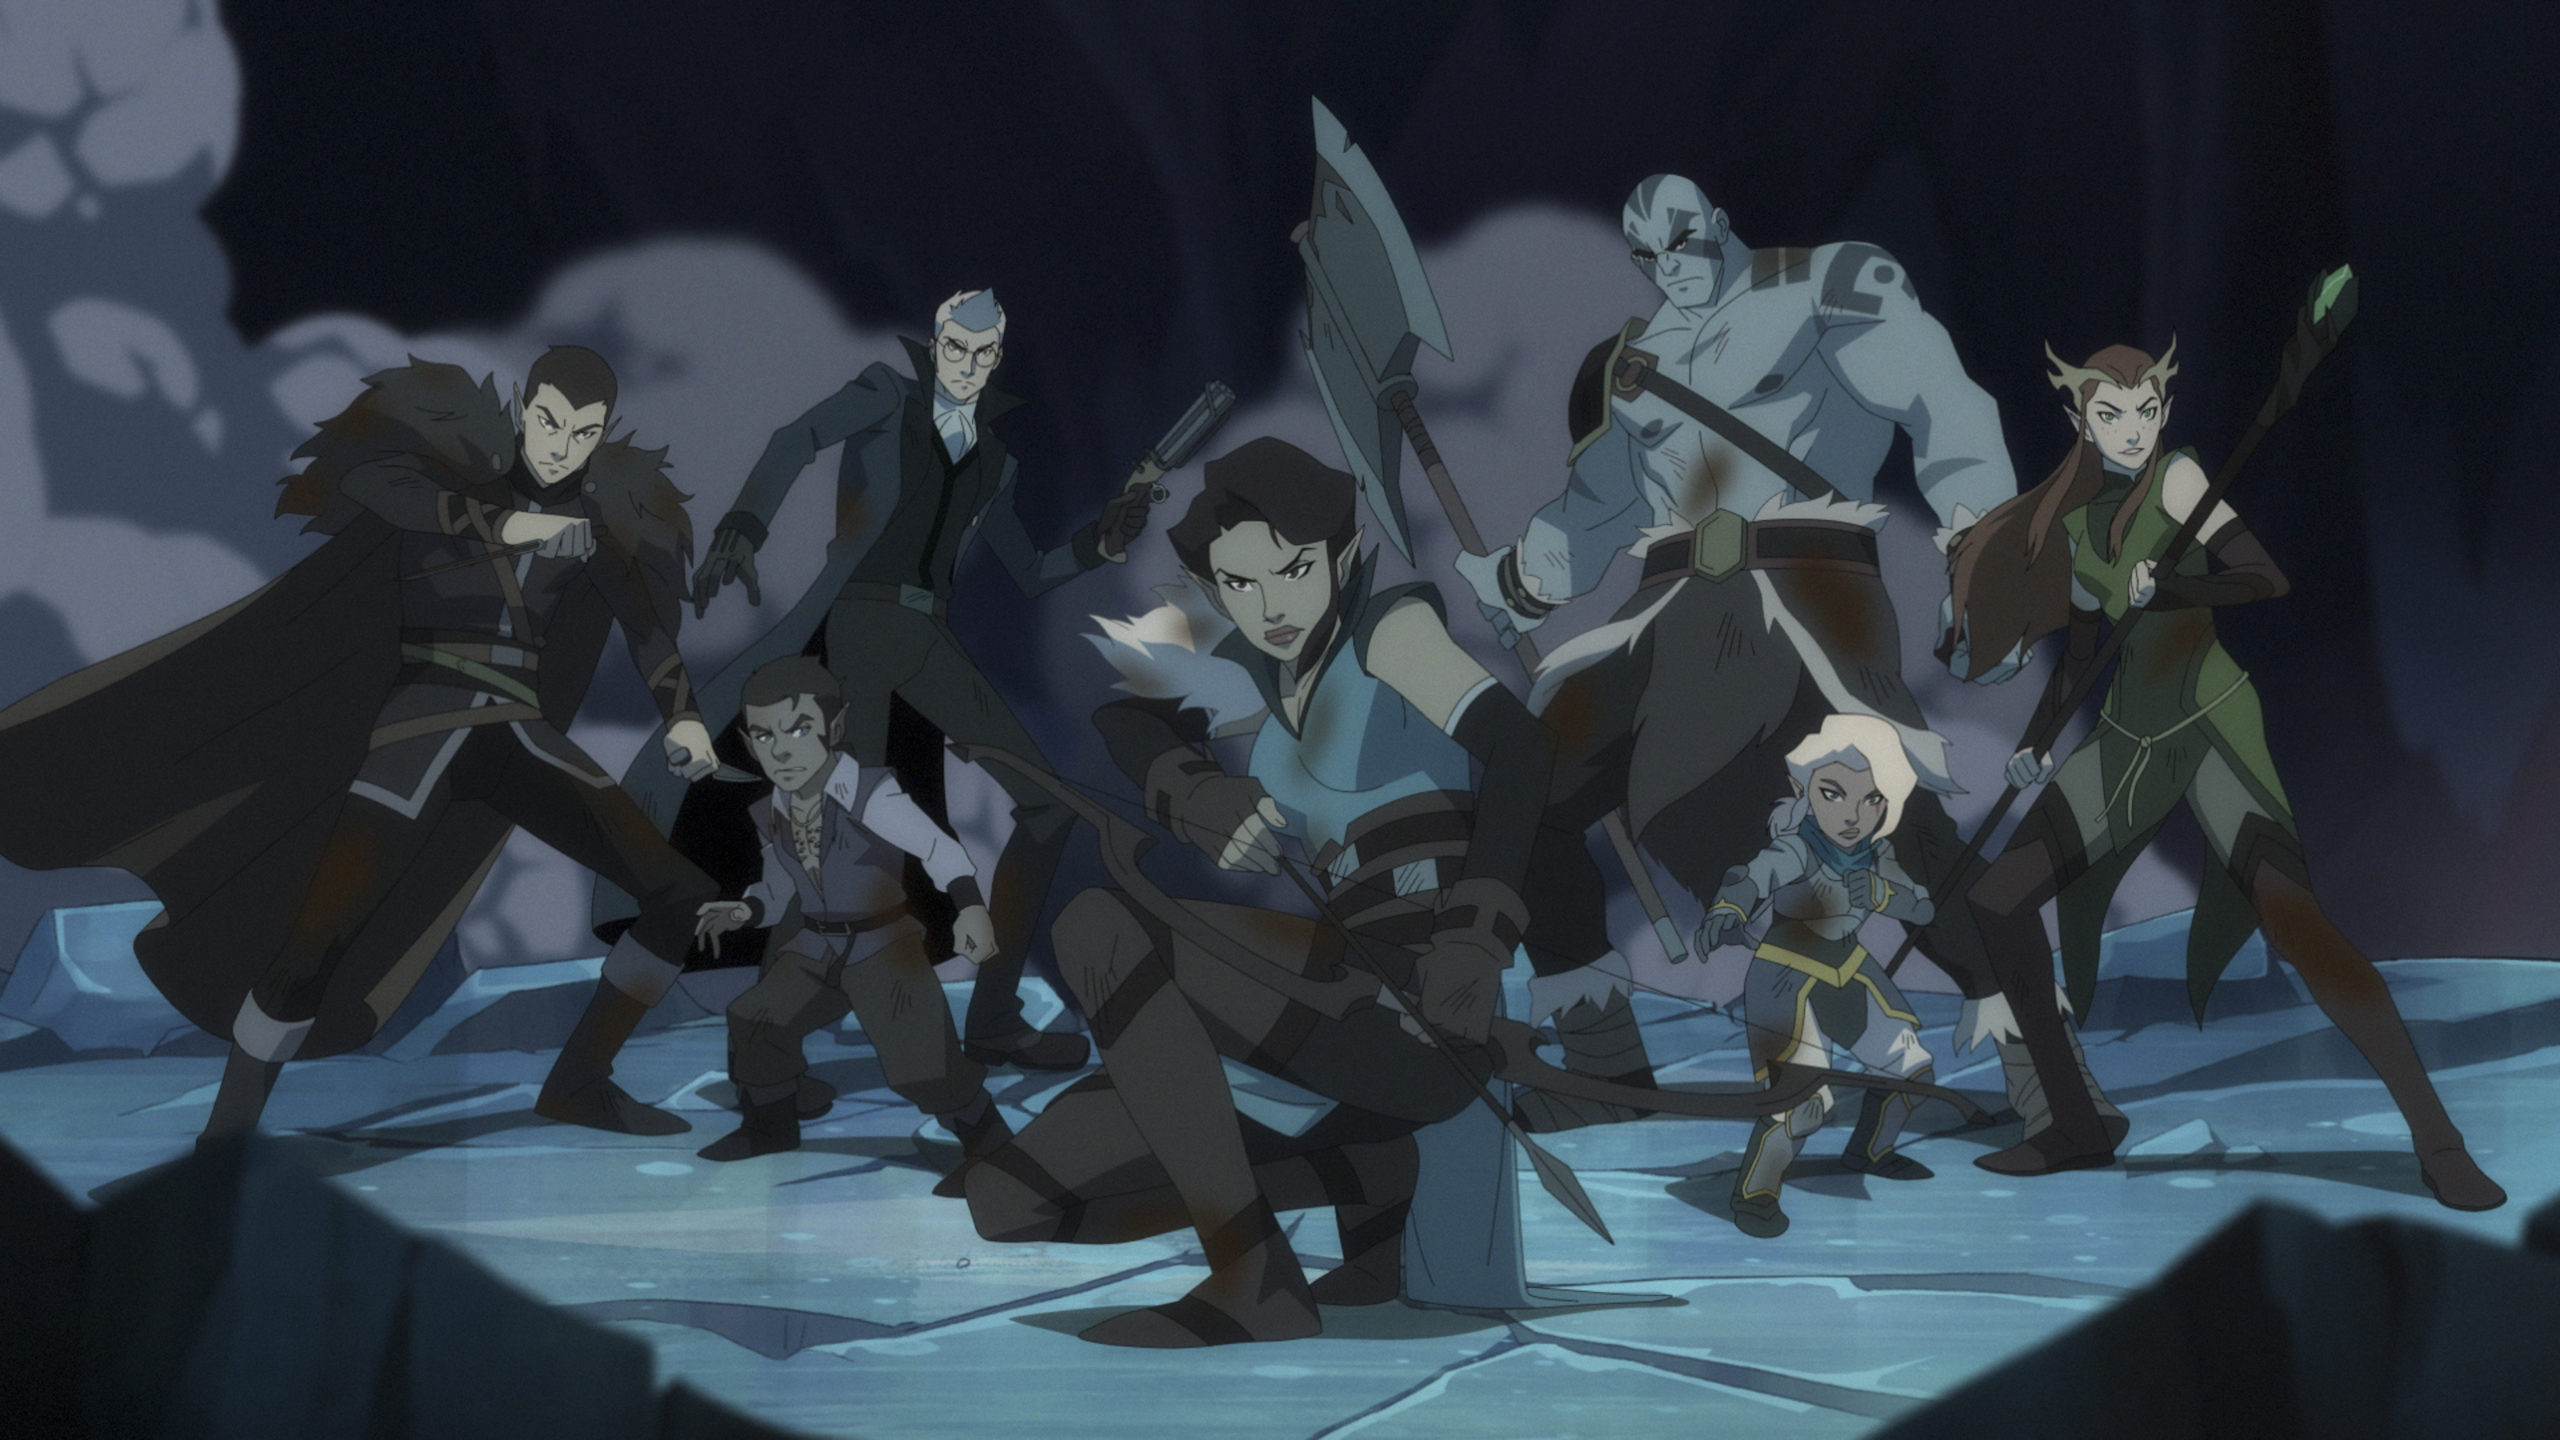 Vox Machina lined up dramatically with all their weapons